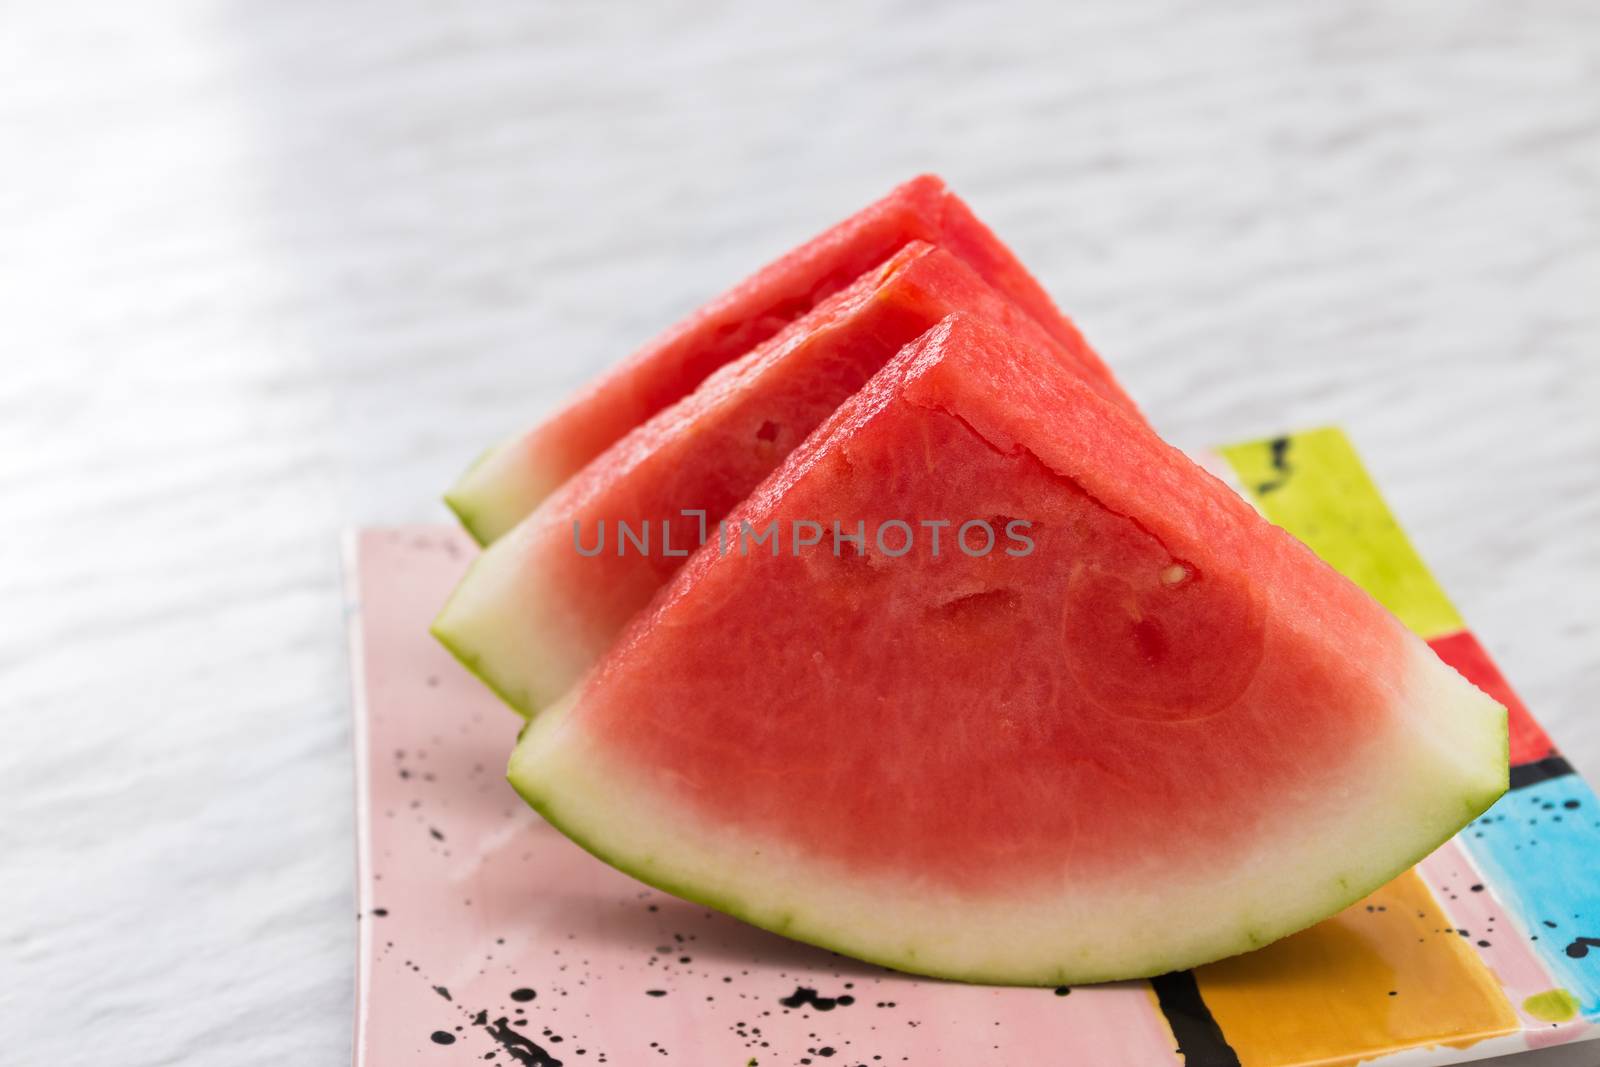 Slices of juicy watermelon on a bright ceramic plate, on marble background.